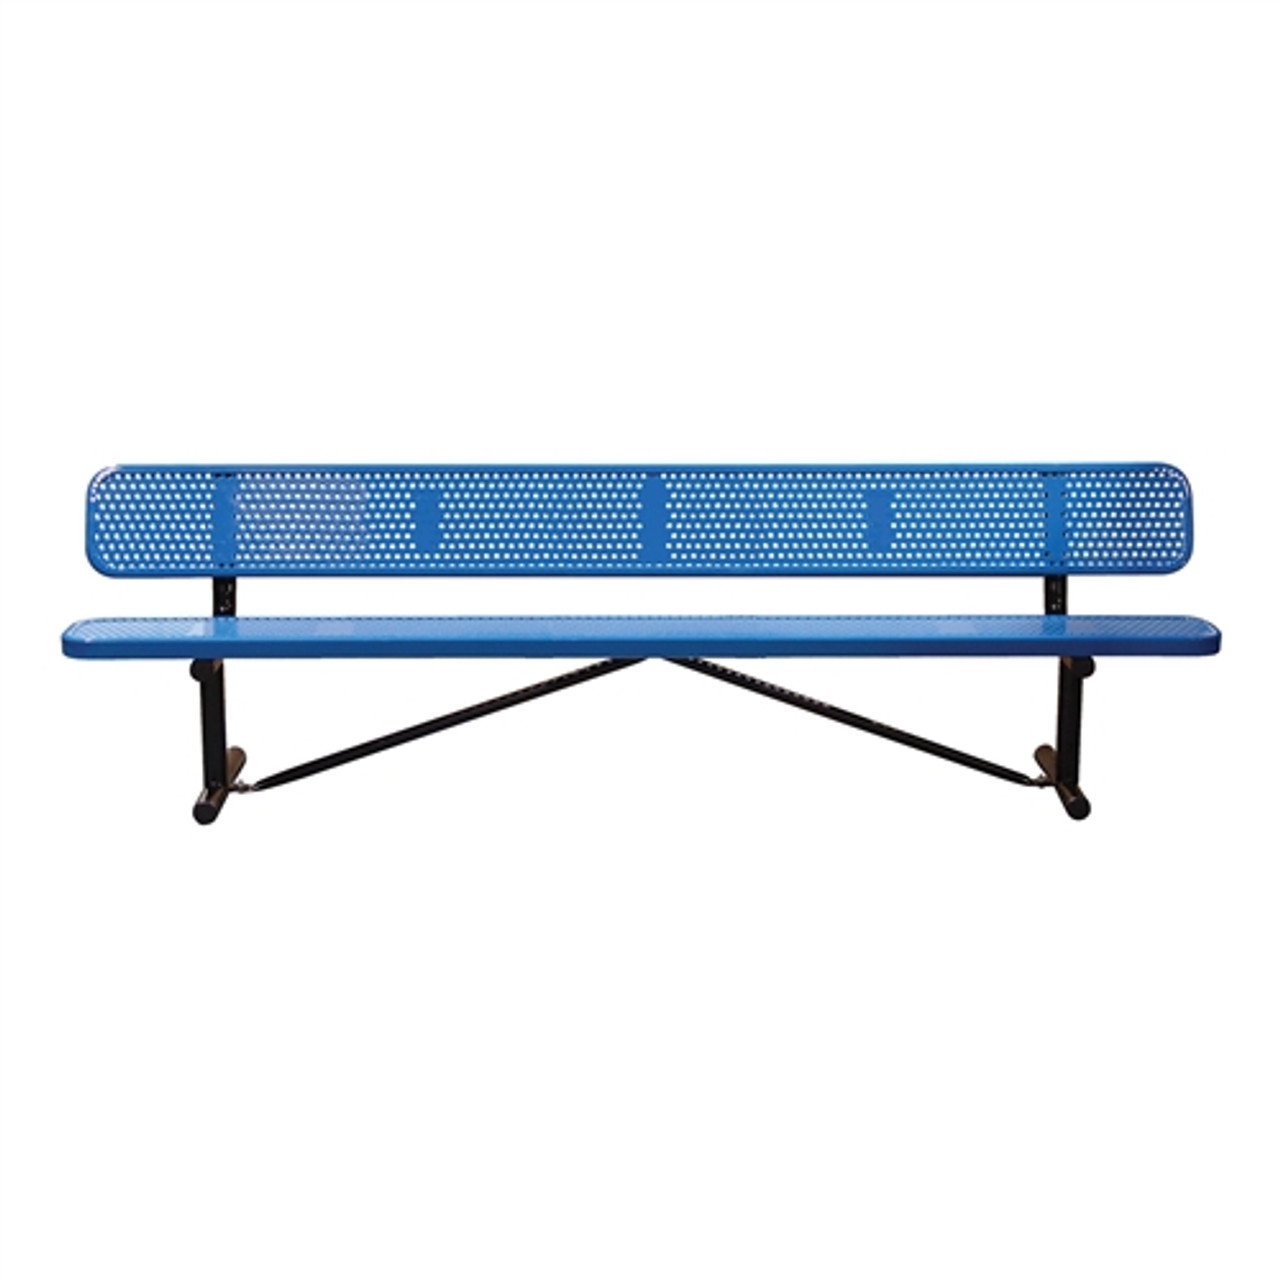 15' Punched Steel Bench with Back - Portable